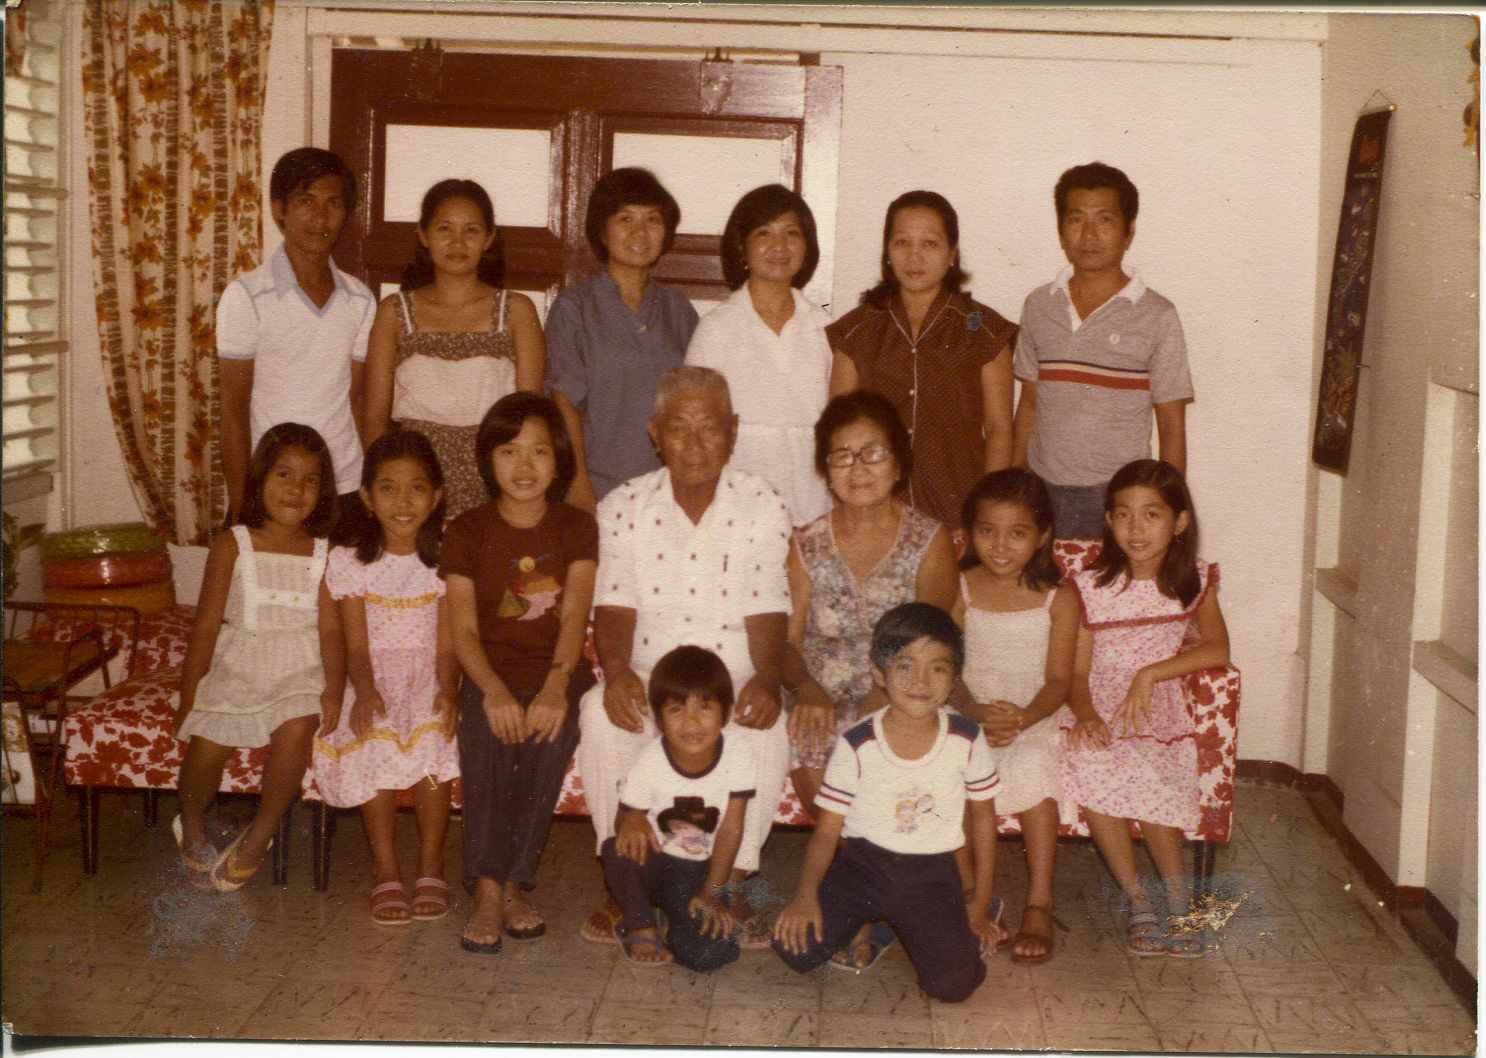 Photo of Escarilla-Carnate and family, 1980Taken in January 1980 in Iloilo City, in paternal grandparents’ house by a professional photographer. Pictured are the grandparents, children, and grandchildren except 2 of her siblings who were born later.Escarilla-Carnate says the family speaks English and Tagalog, and the Ilongot dialect called Hiligaynon which has a “melodious” tone compared to Karay-a which is “harsh/harder” in tone.Escarilla-Carnate said, “This photo is significant because family is important and I am very close with siblings and cousins. Every Sunday, we have lunch or dinner with grandparents. These are good memories. Every Sunday after mass, my dad or or grandpa would stop bymarket to buy fresh meat, thin pork chops (no vegetables). Only one piece of liver was delivered on Sundays. There was no supermarket. We used vinegar and chili dip. The menu was always the same every Sunday.” Any views, findings, conclusions, or recommendations expressed in this story do not necessarily represent those of the National Endowment for the Humanities. (c) Field Museum of Natural History - CC BY-NC 4.0